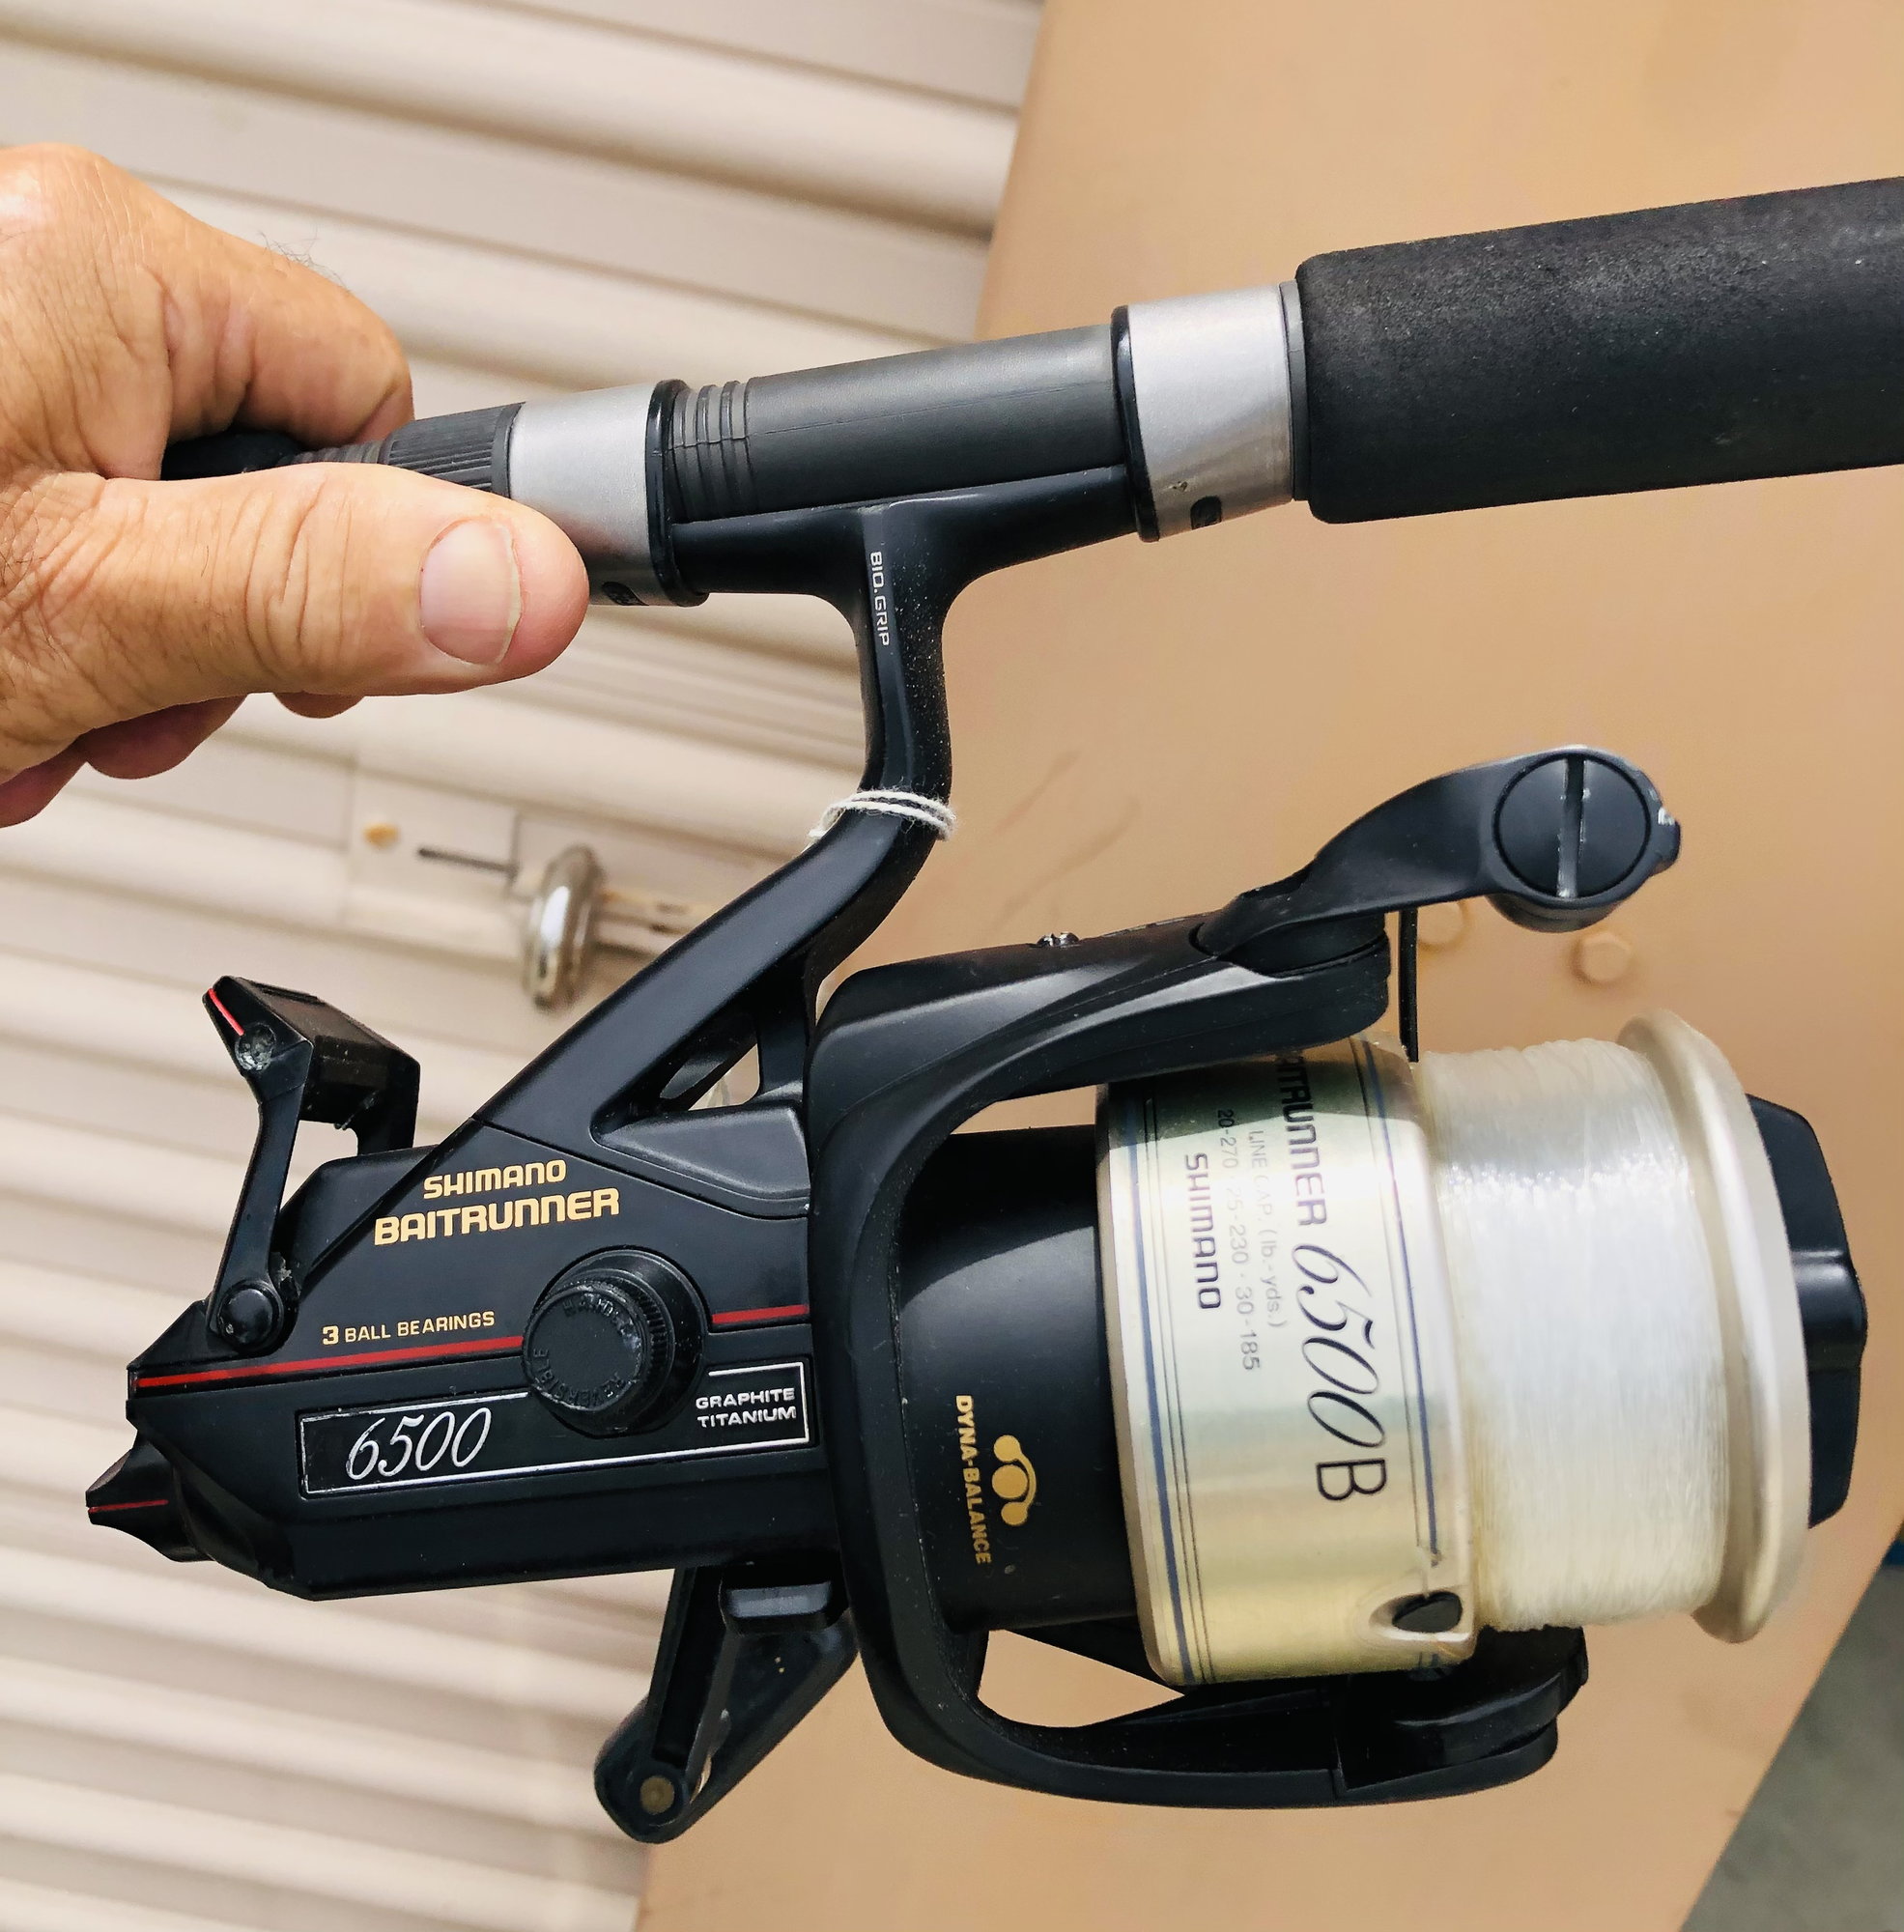 WTB Shimano Baitrunner 6500B for parts - The Hull Truth - Boating